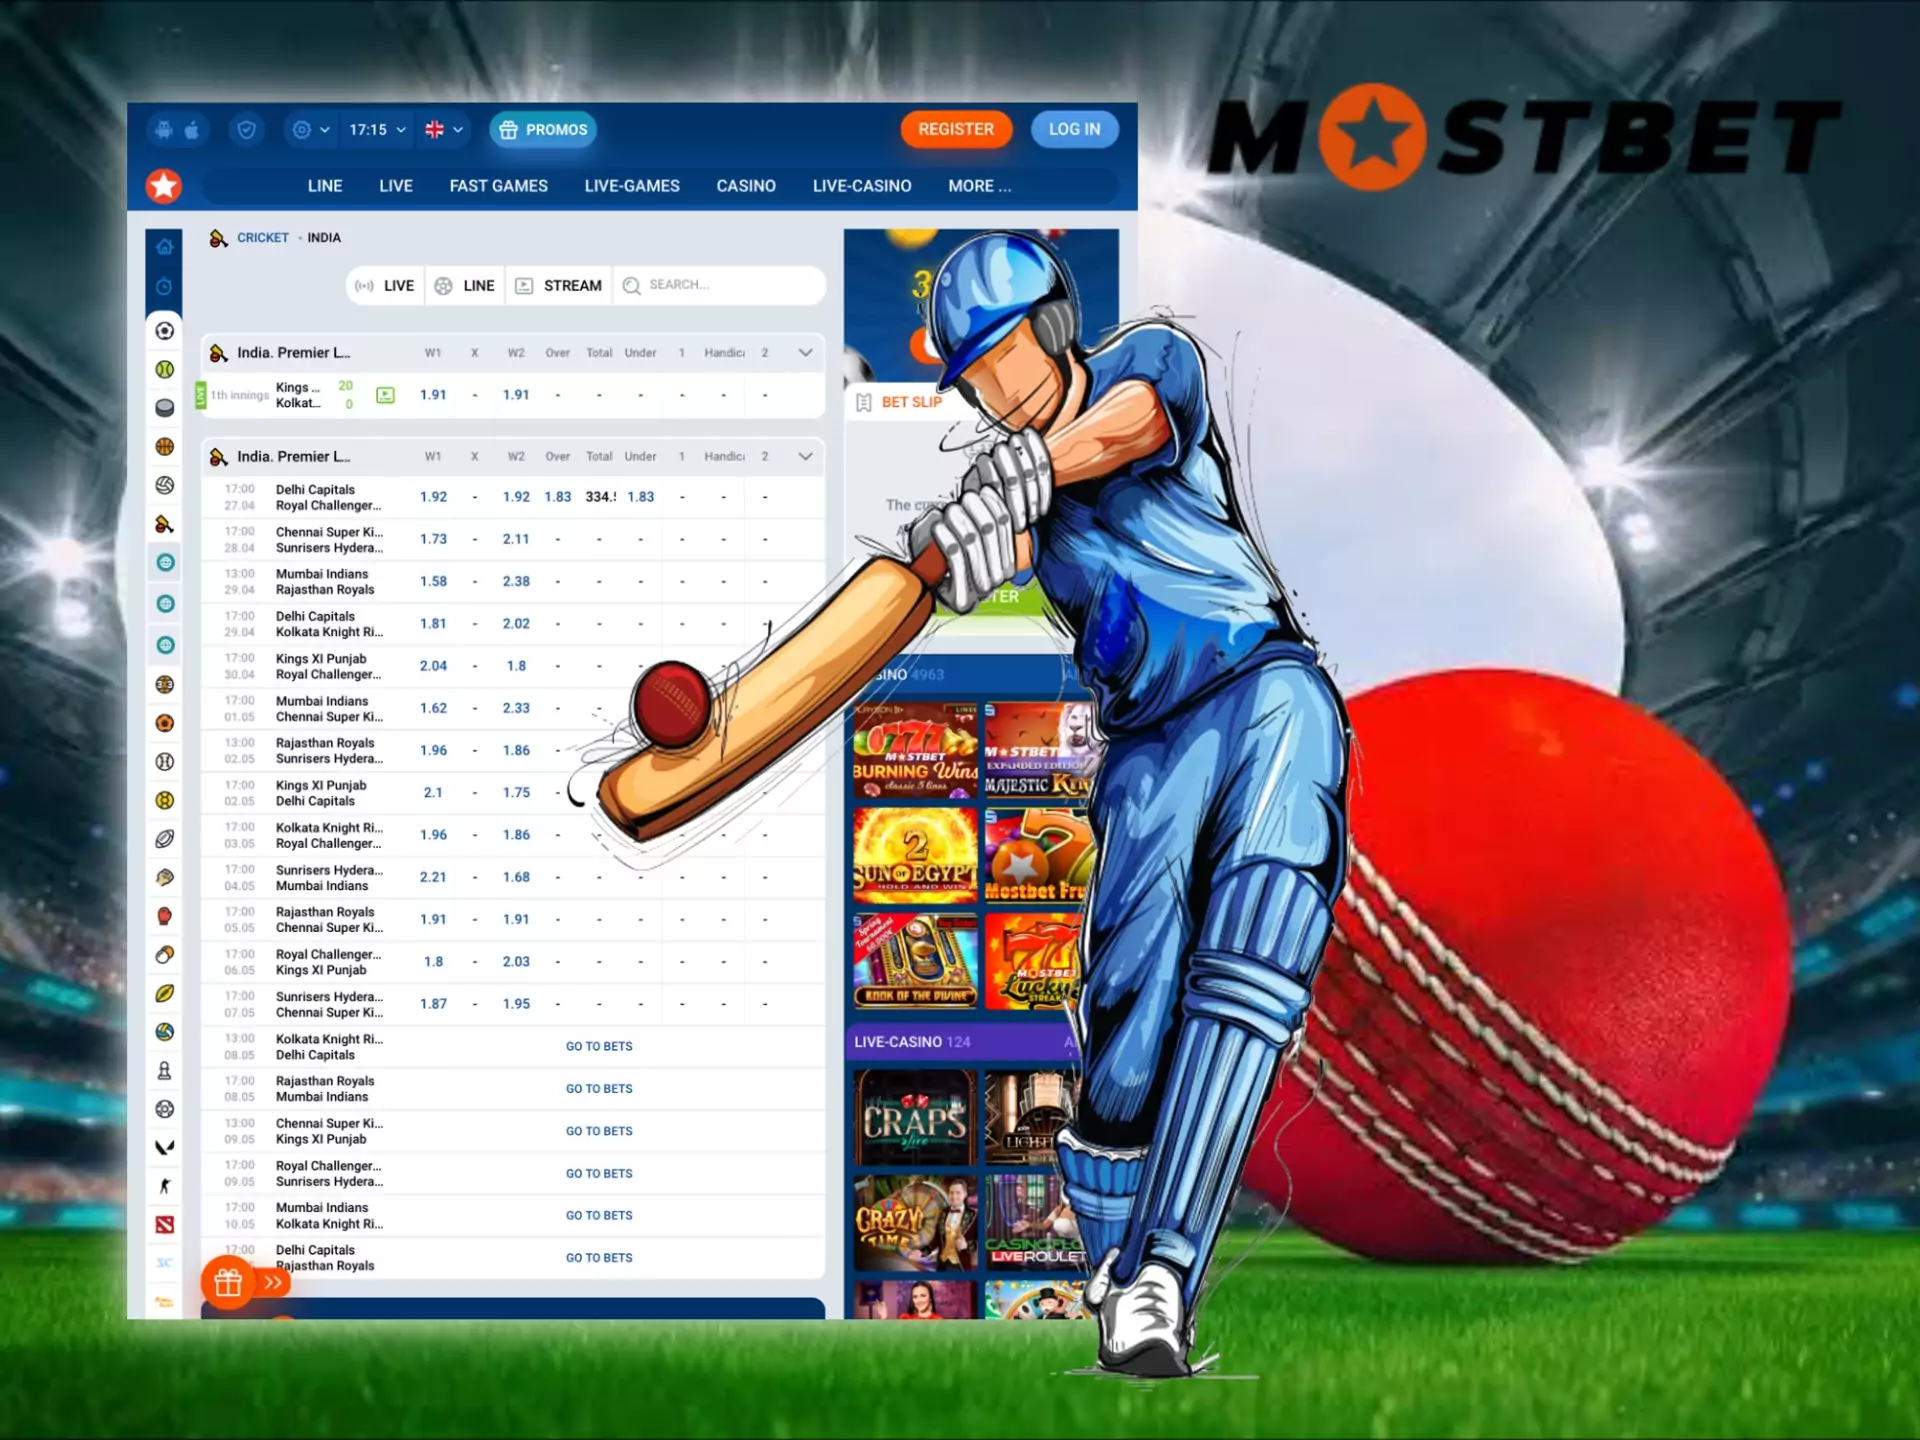 You can find profitable odds on cricket betting at Mostbet.